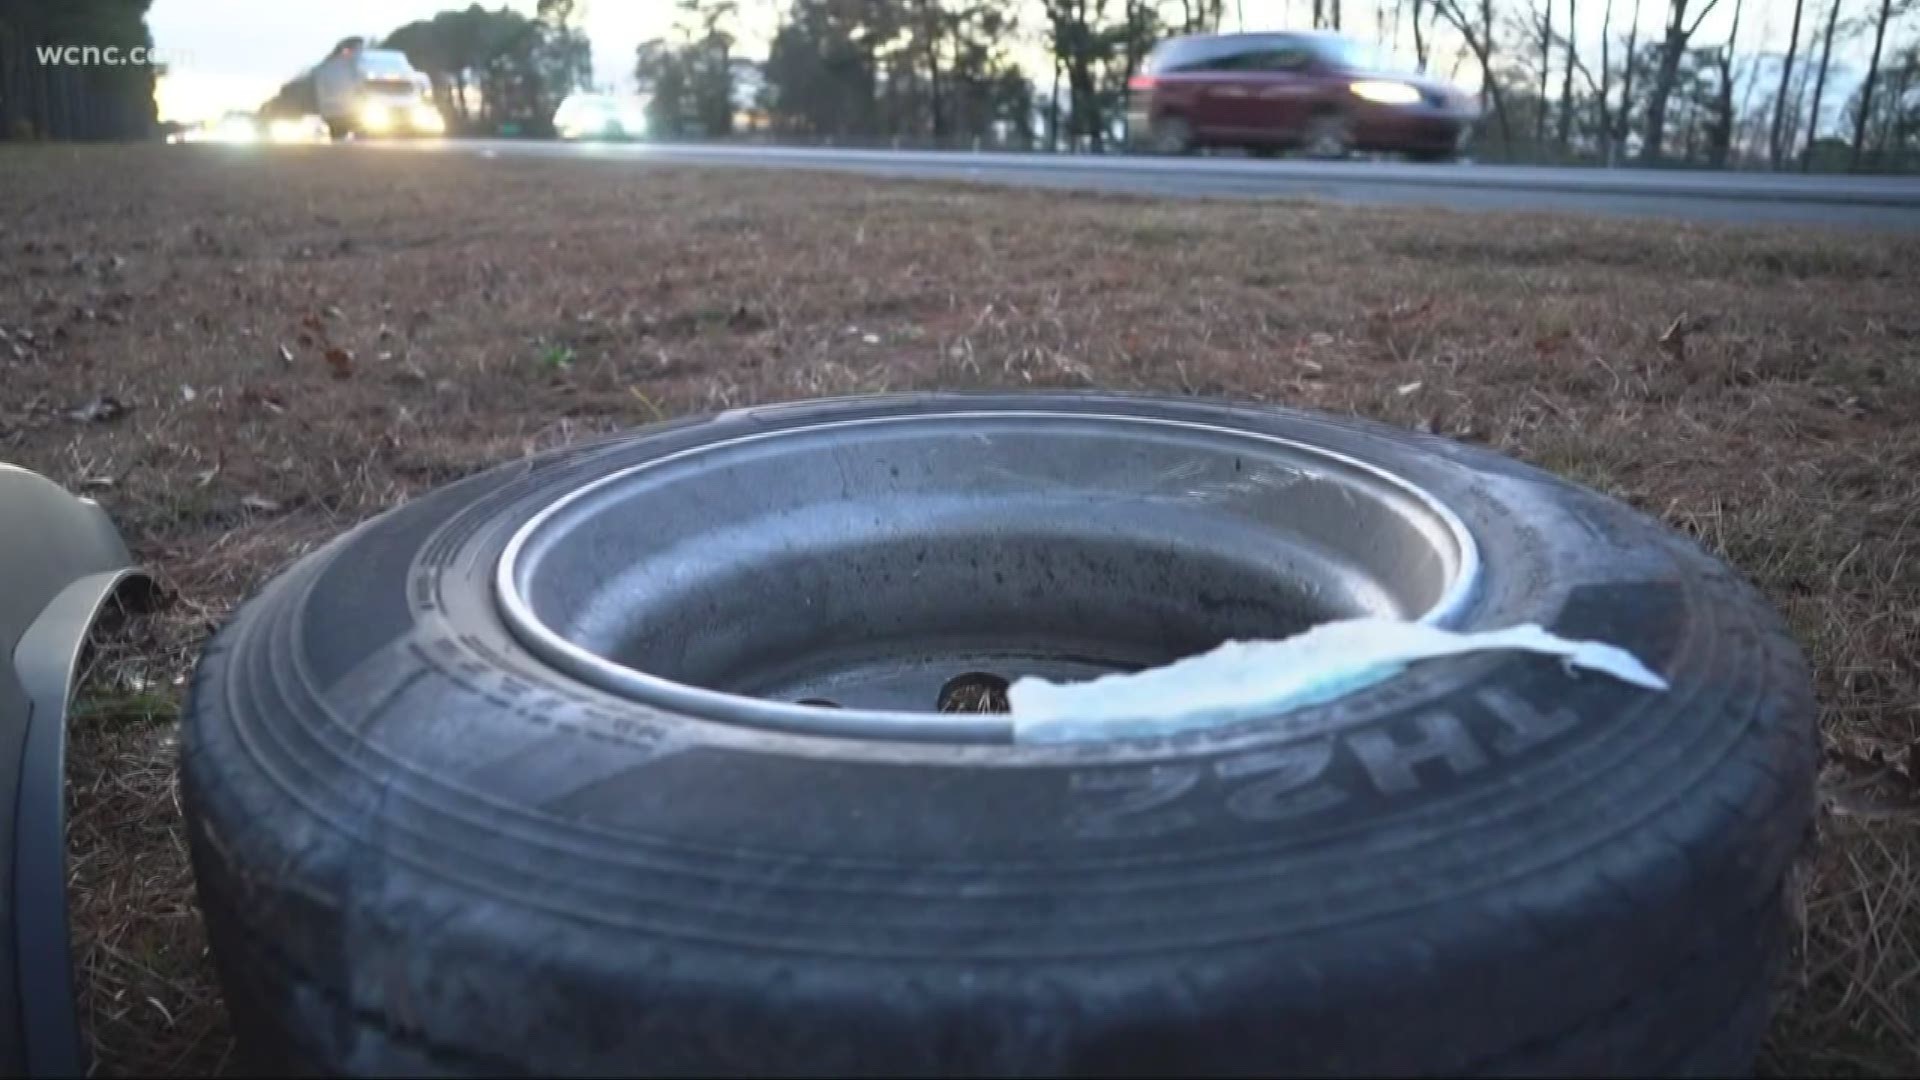 NBC Charlotte has reported on several other cases like this of dangerous debris hitting cars.